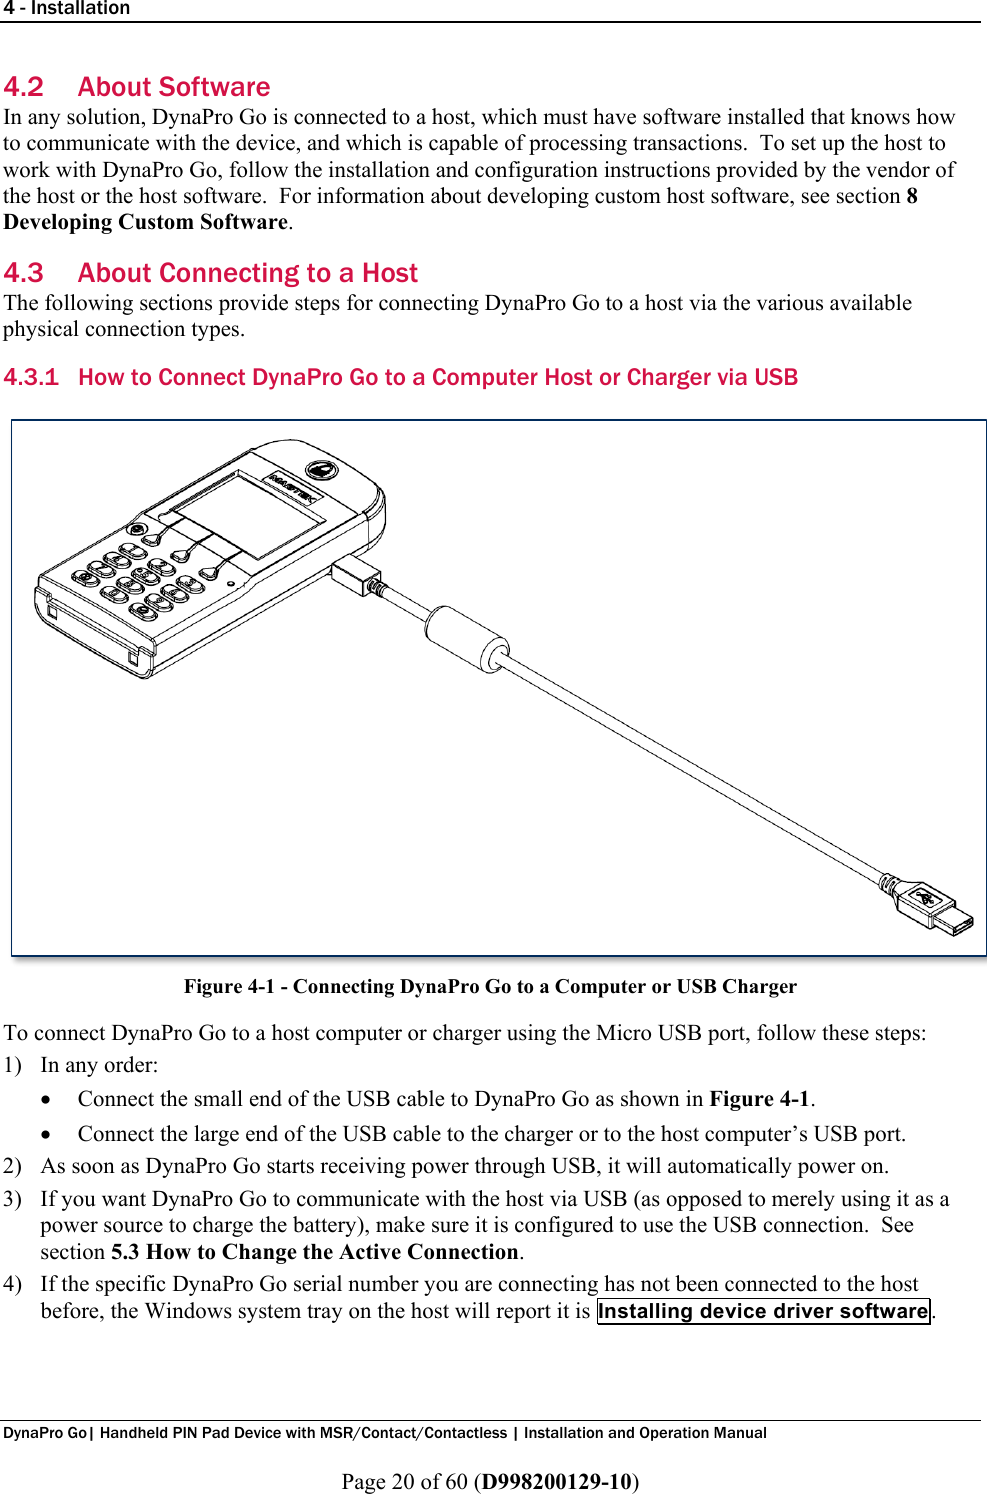 4 - Installation  DynaPro Go| Handheld PIN Pad Device with MSR/Contact/Contactless | Installation and Operation Manual  Page 20 of 60 (D998200129-10) 4.2 About Software In any solution, DynaPro Go is connected to a host, which must have software installed that knows how to communicate with the device, and which is capable of processing transactions.  To set up the host to work with DynaPro Go, follow the installation and configuration instructions provided by the vendor of the host or the host software.  For information about developing custom host software, see section 8 Developing Custom Software. 4.3 About Connecting to a Host The following sections provide steps for connecting DynaPro Go to a host via the various available physical connection types. 4.3.1 How to Connect DynaPro Go to a Computer Host or Charger via USB  Figure 4-1 - Connecting DynaPro Go to a Computer or USB Charger To connect DynaPro Go to a host computer or charger using the Micro USB port, follow these steps: 1) In any order: • Connect the small end of the USB cable to DynaPro Go as shown in Figure 4-1. • Connect the large end of the USB cable to the charger or to the host computer’s USB port. 2) As soon as DynaPro Go starts receiving power through USB, it will automatically power on. 3) If you want DynaPro Go to communicate with the host via USB (as opposed to merely using it as a power source to charge the battery), make sure it is configured to use the USB connection.  See section 5.3 How to Change the Active Connection. 4) If the specific DynaPro Go serial number you are connecting has not been connected to the host before, the Windows system tray on the host will report it is Installing device driver software. 